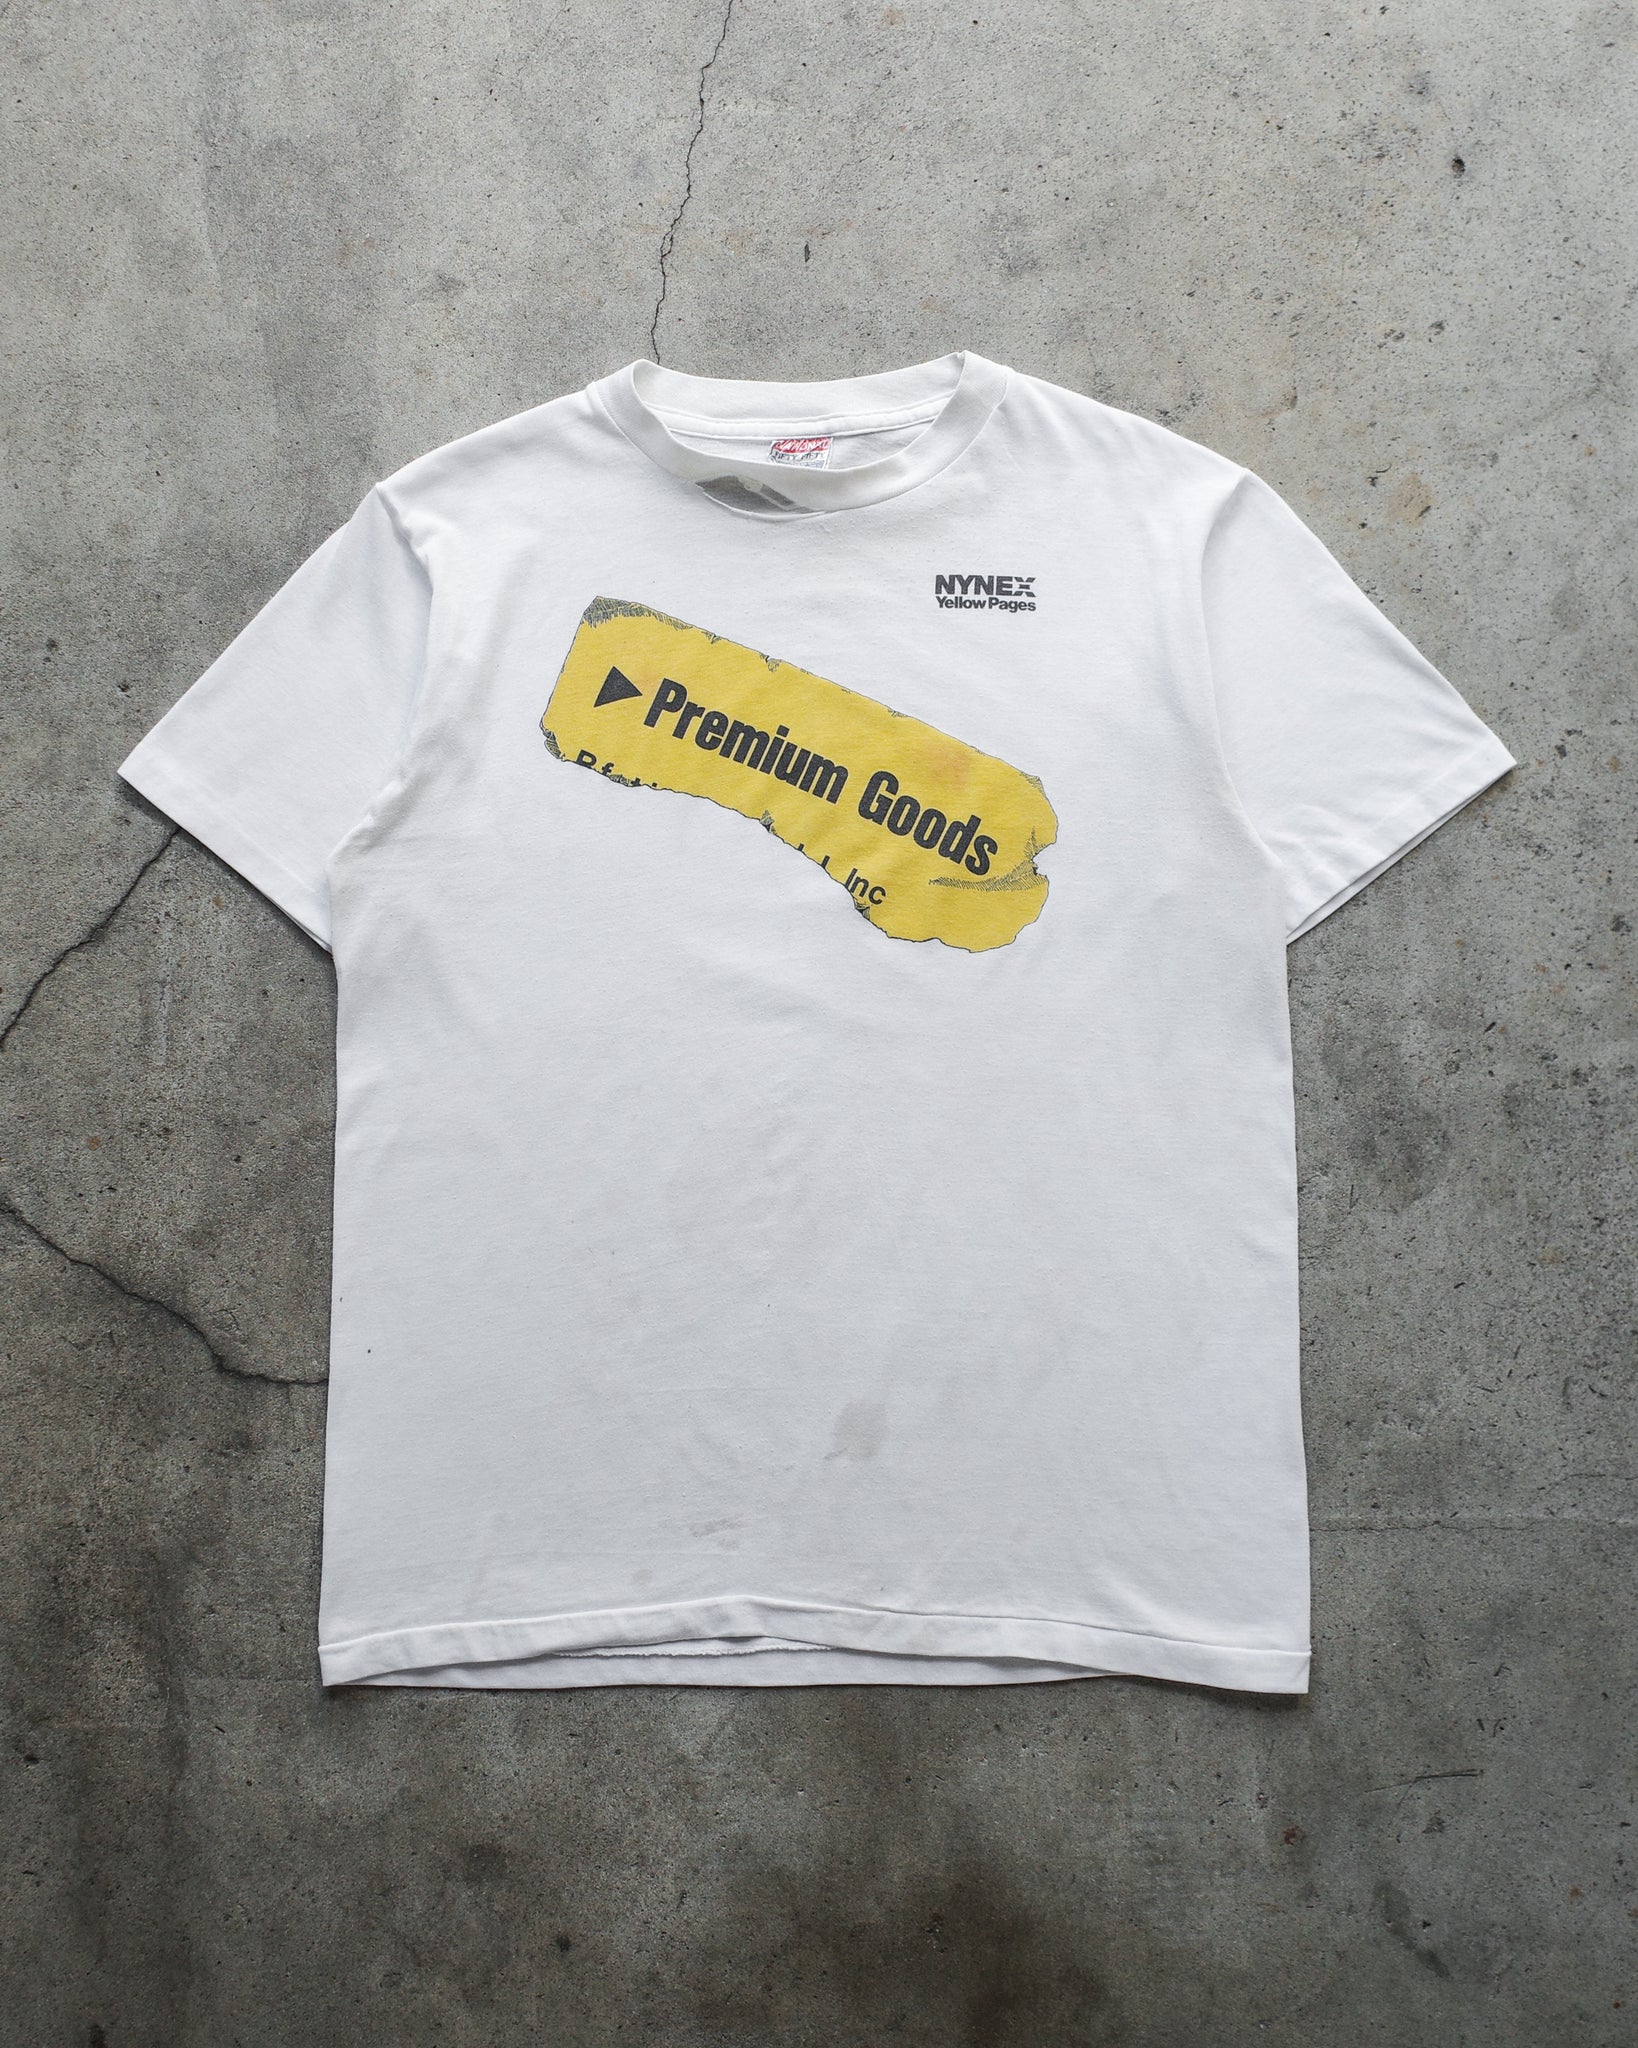 1980s NYNEX Yellow Pages Tee